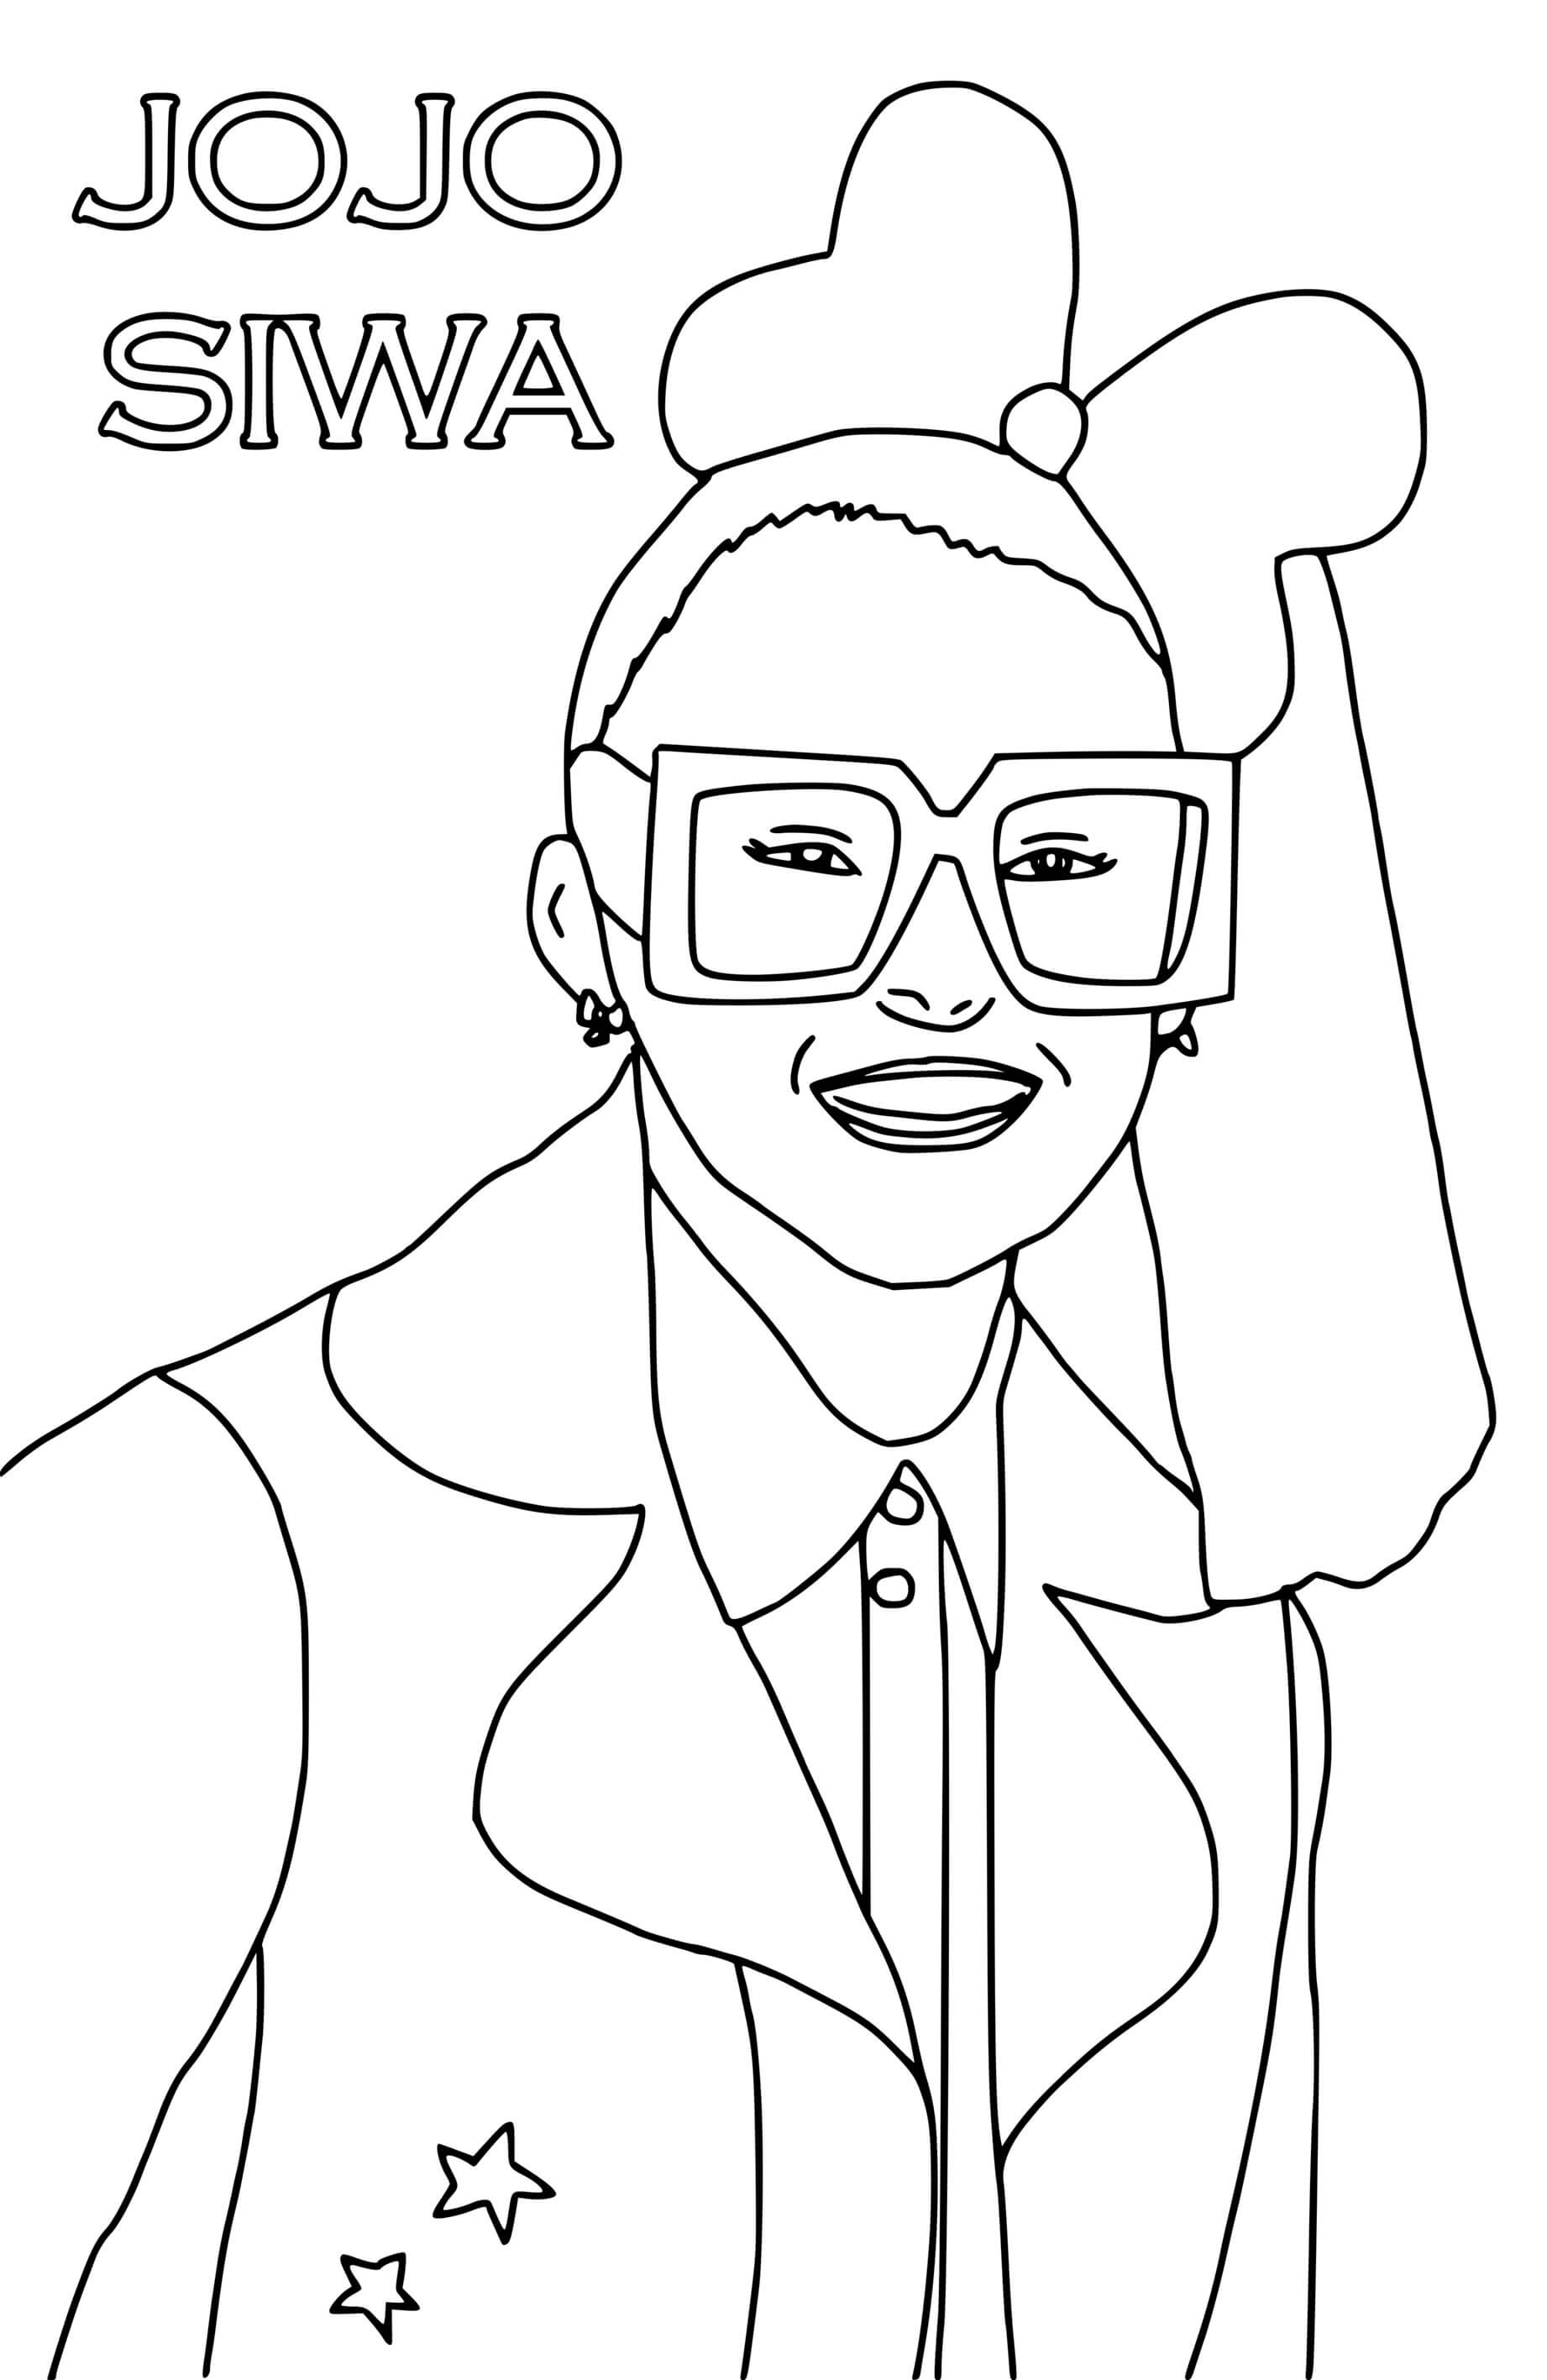 Jojo Siwa With Glasses Coloring Pages   Coloring Cool